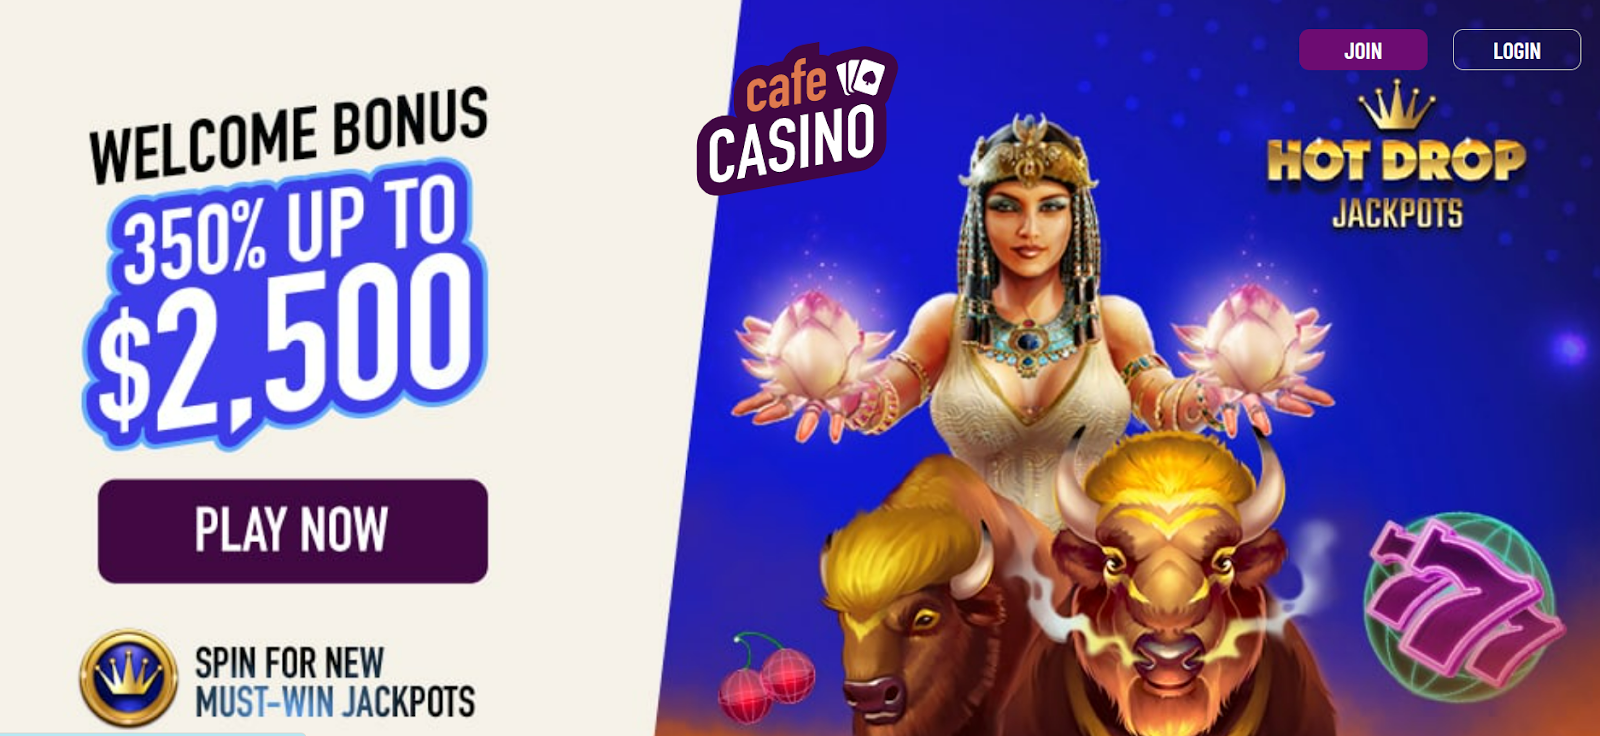 Compare Free Bingo Sites, Finding genuine gaming portal is …